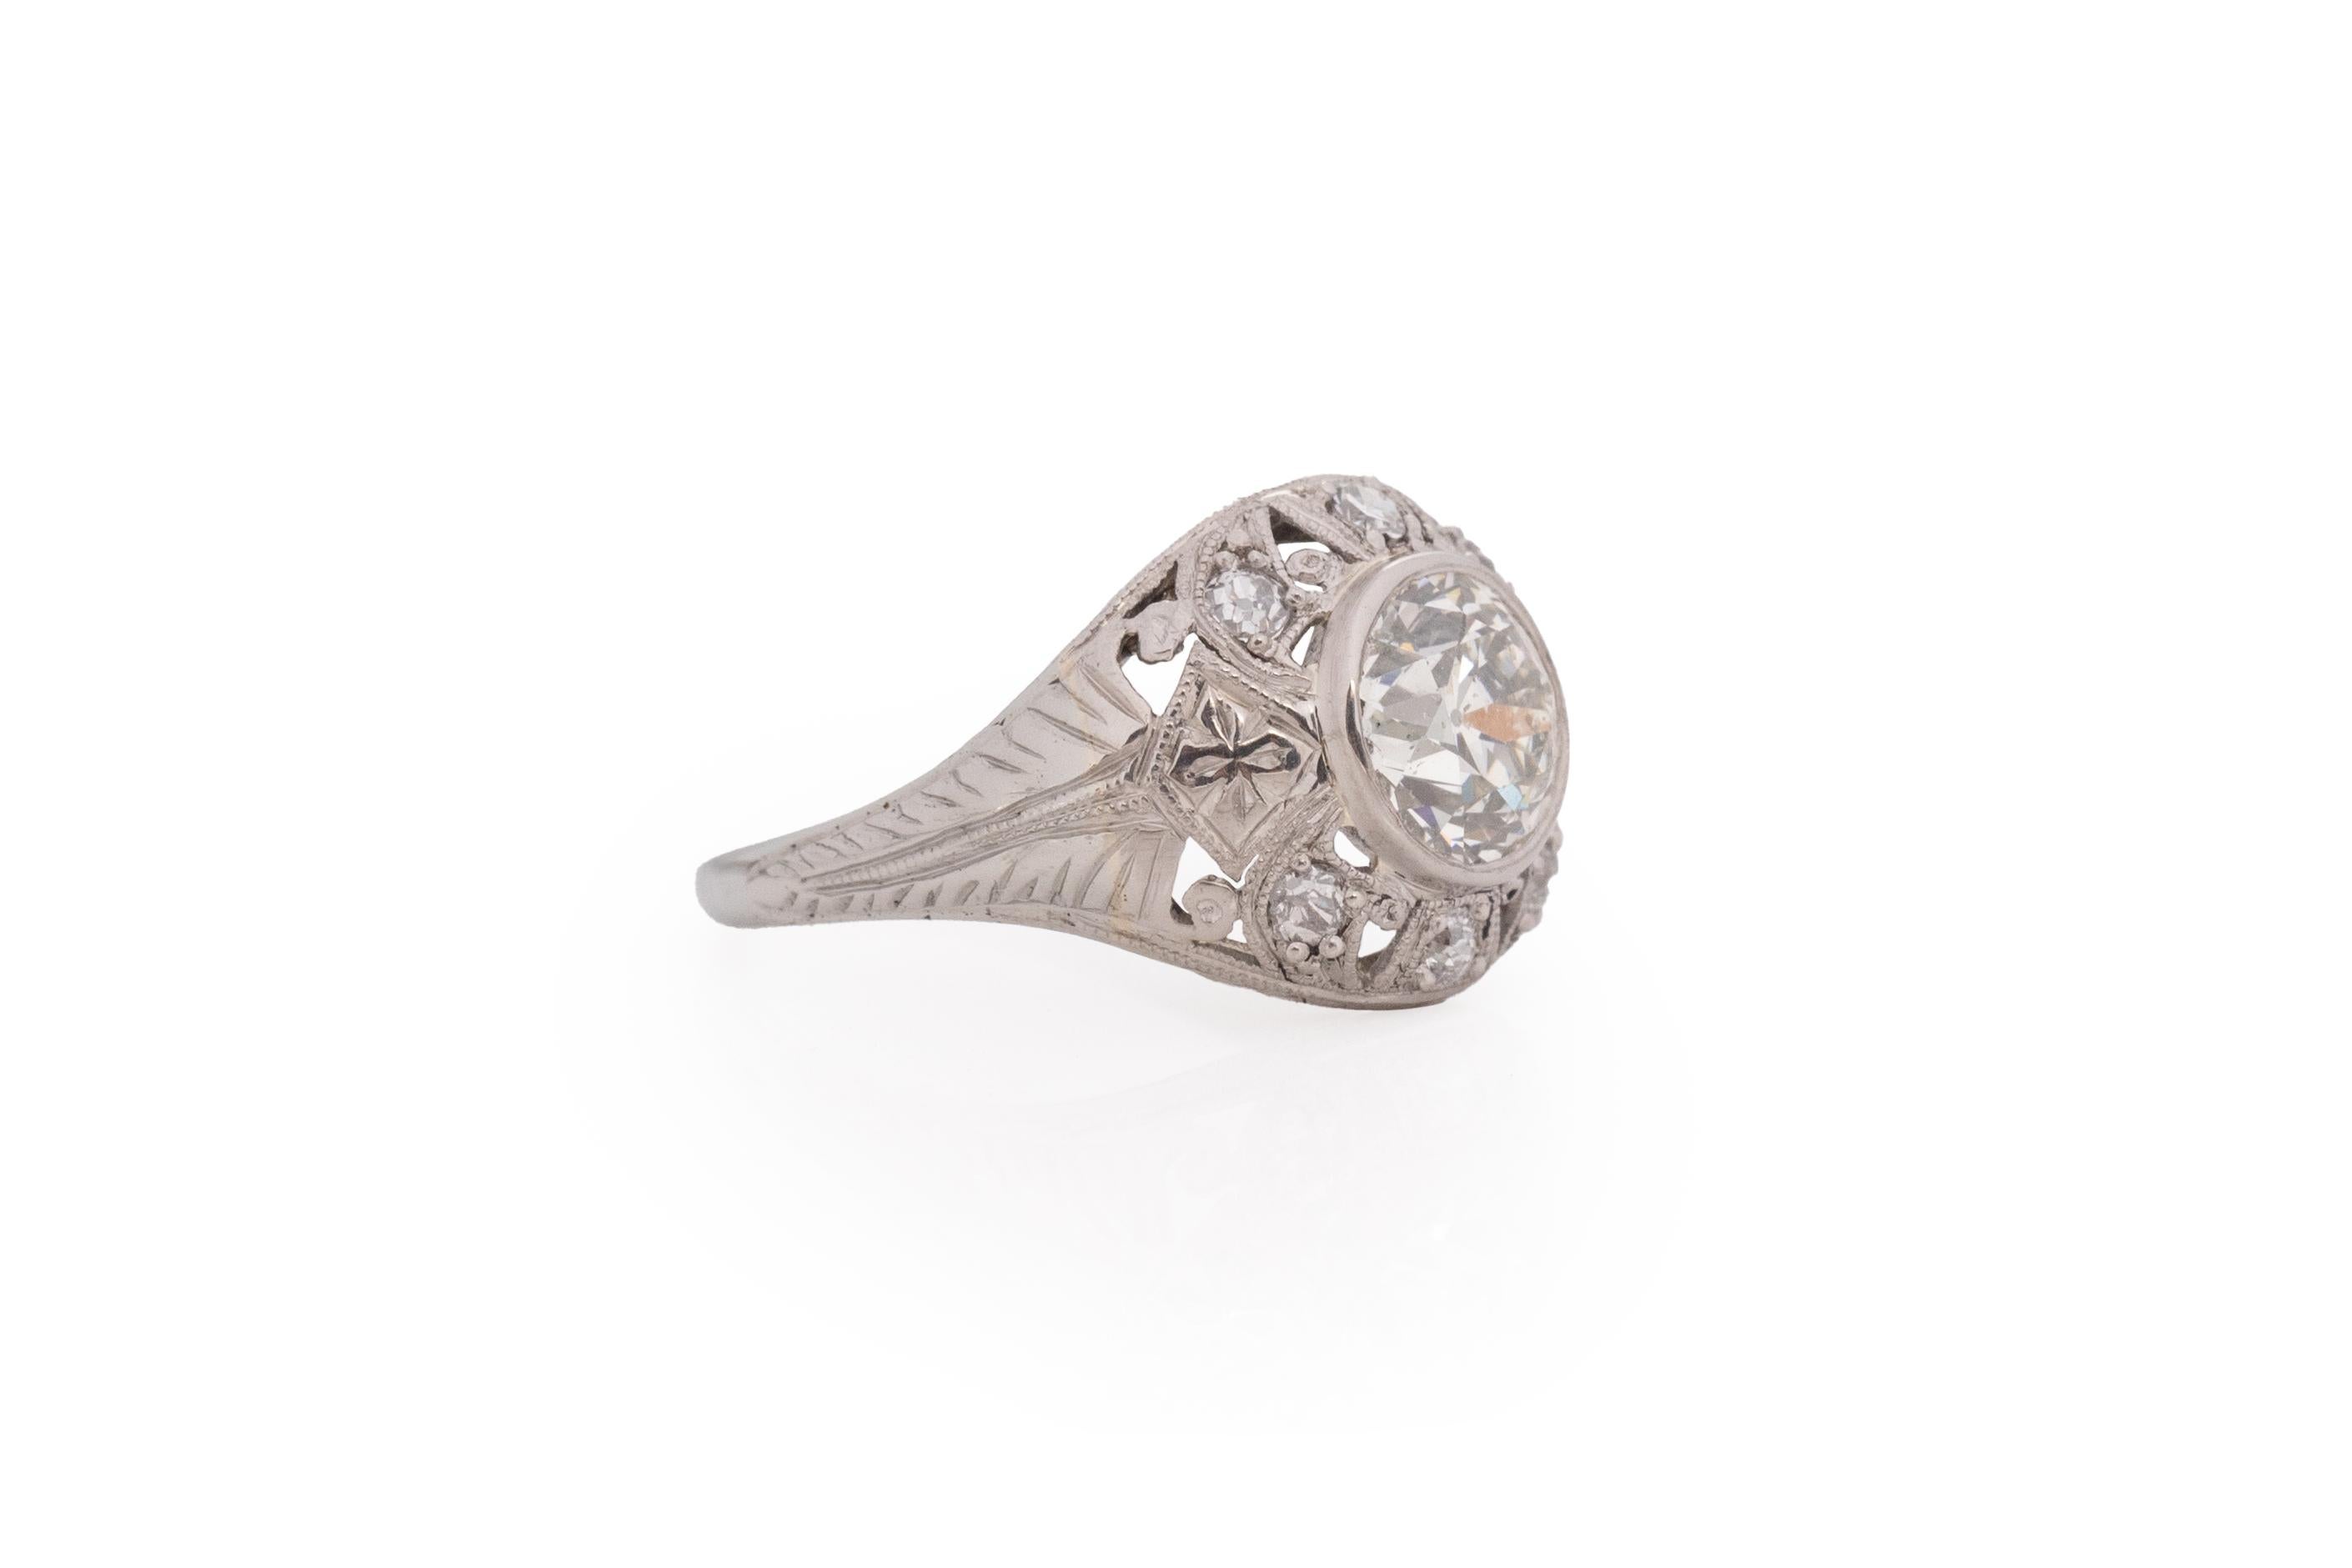 Ring Size: 4.5
Metal Type: Platinum [Hallmarked, and Tested]
Weight: 2.1 grams

Center Diamond Details:
Weight: 1.20 carat
Cut: Old European brilliant
Color: J/K
Clarity: I1

Side Stone Details:
Weight: .15 carat, total weight
Cut: Antique European